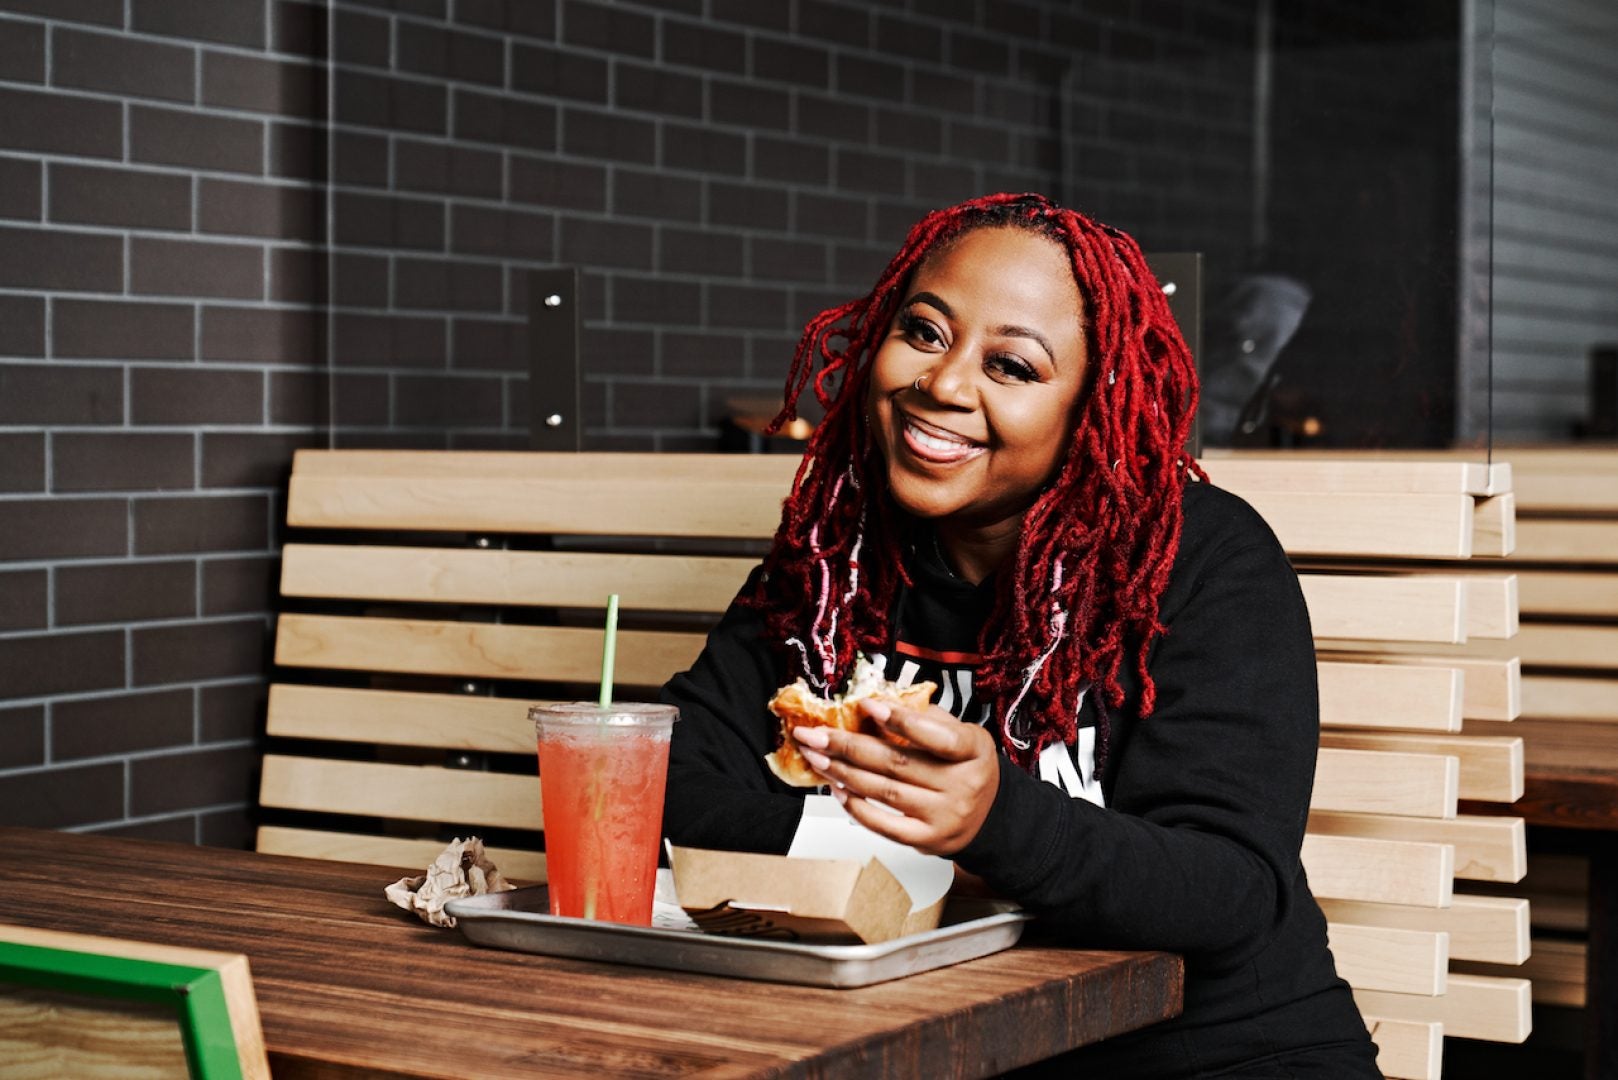 Shake Shack Partners With Black Owned ‘Slutty Vegan’ For Limited-Edition Vegan Burger